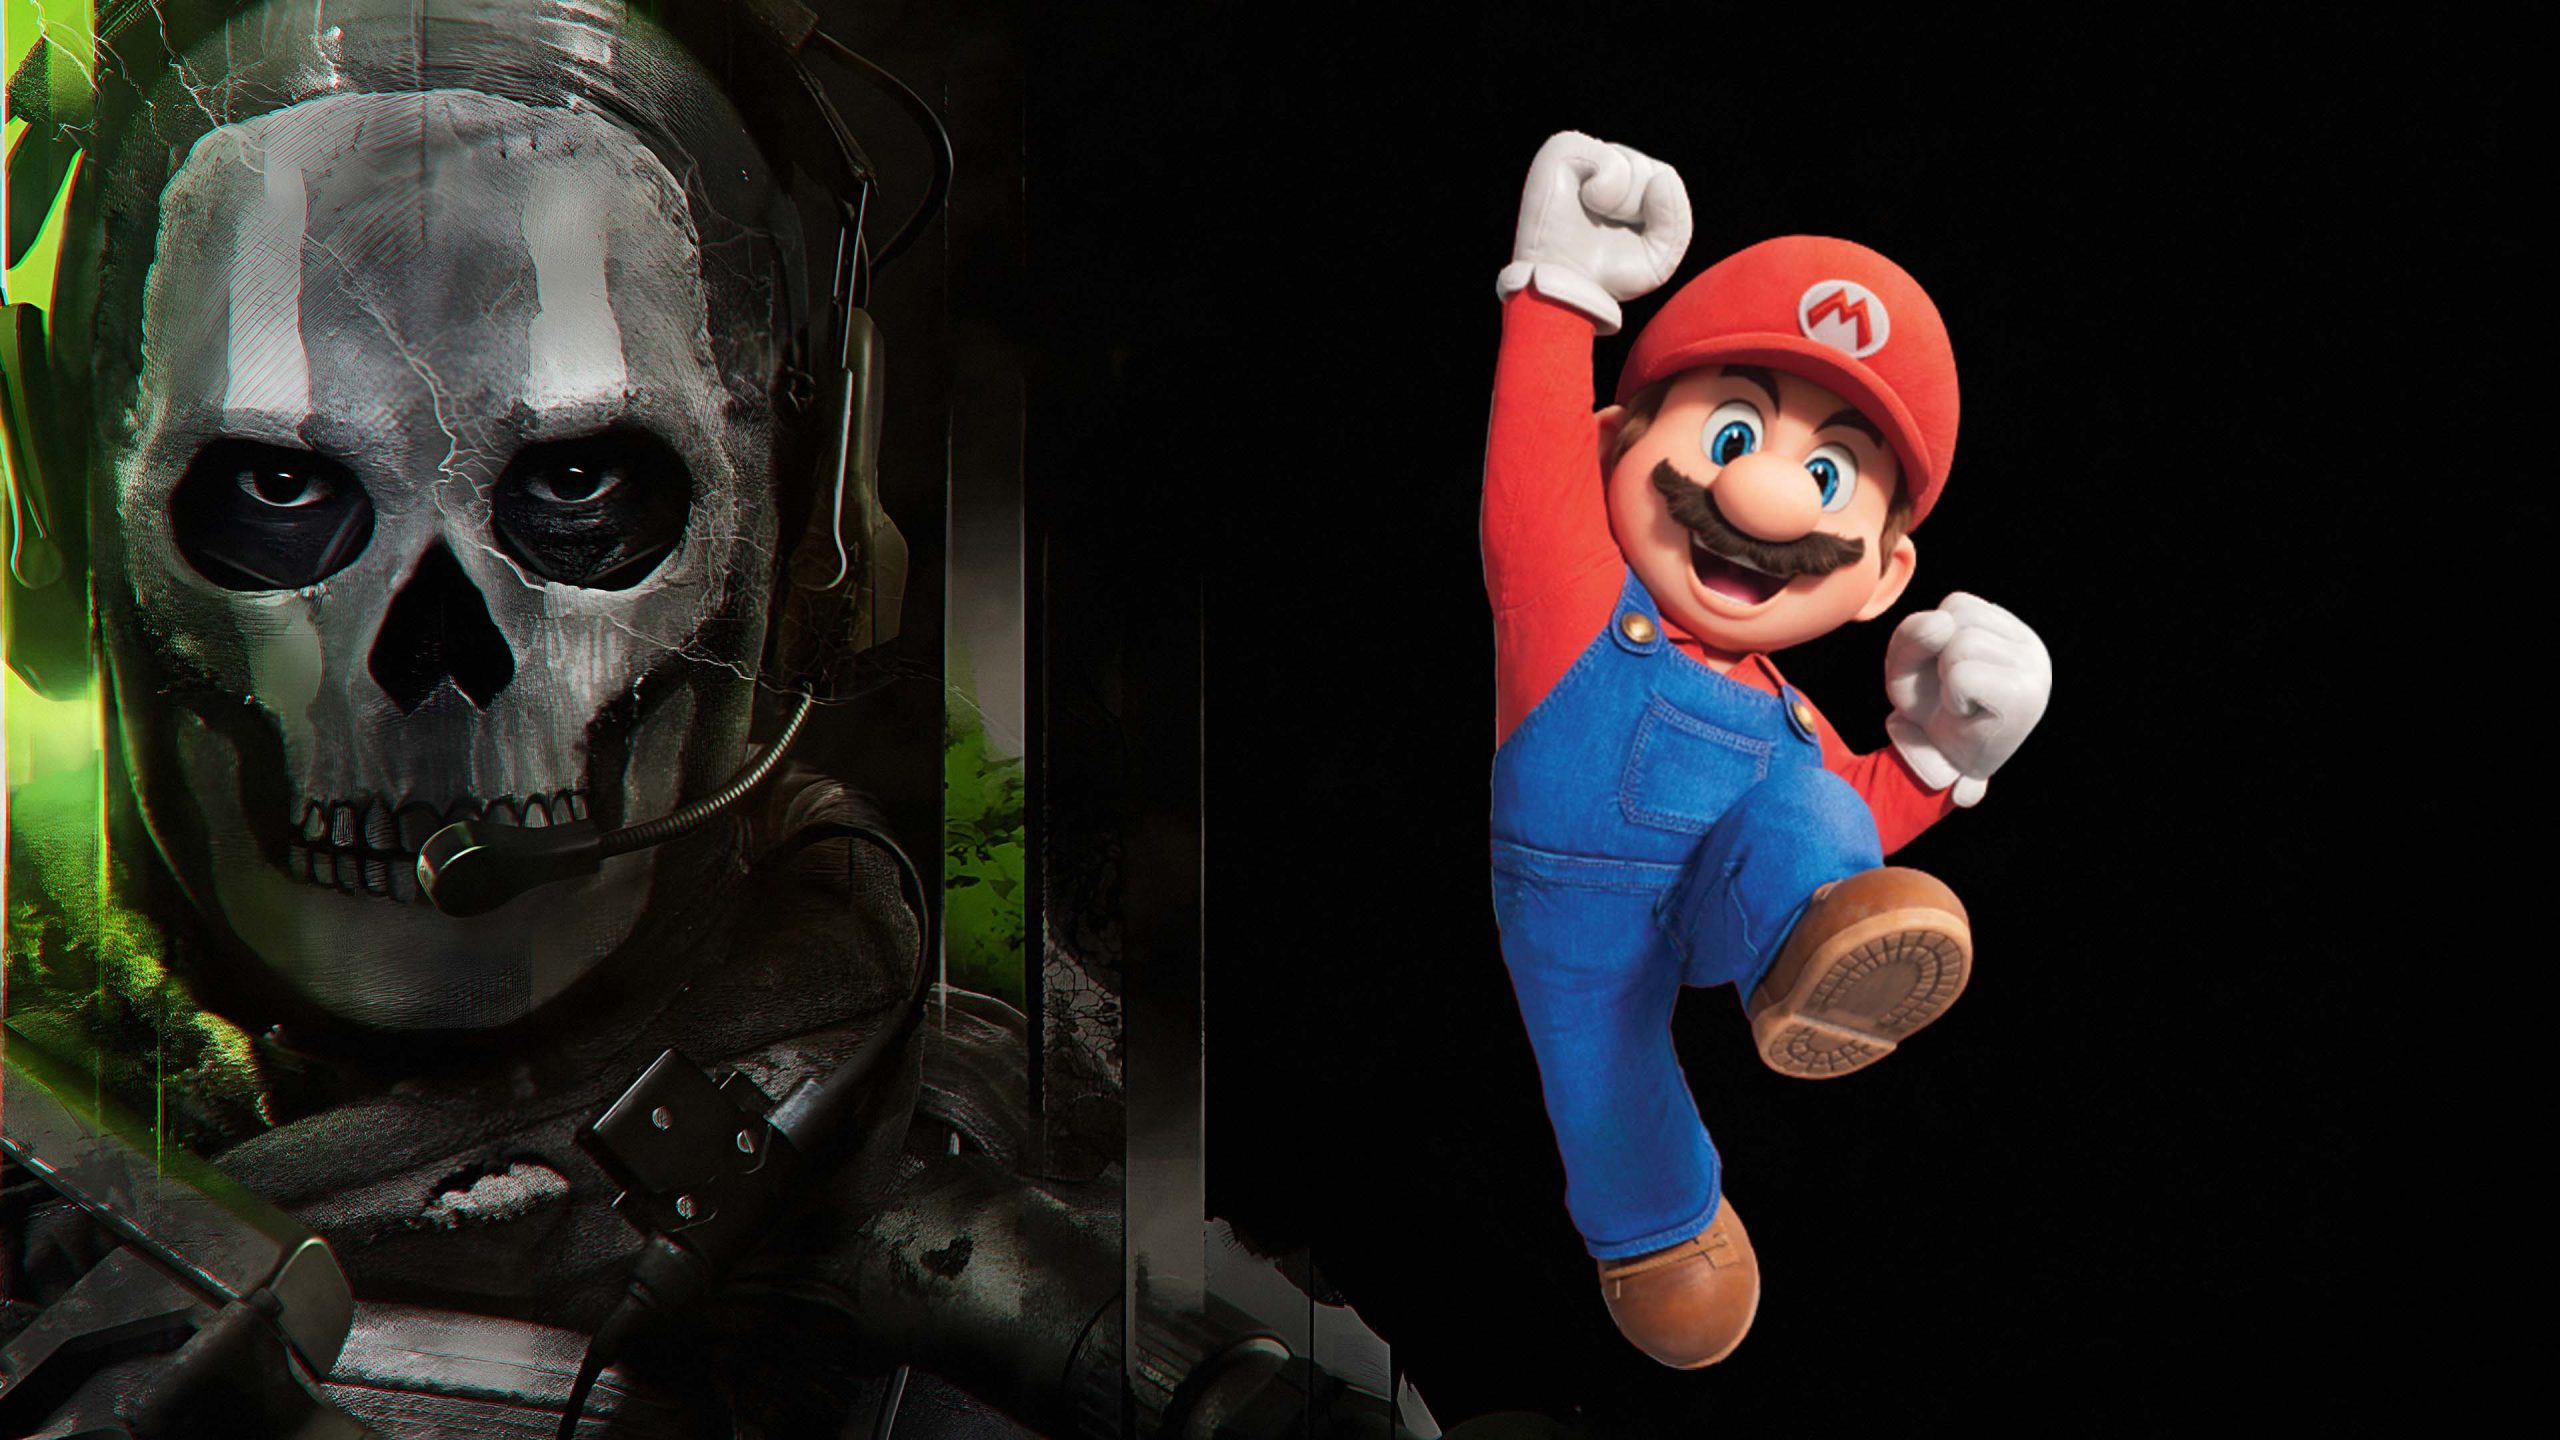 Call of Duty will come to Nintendo thanks to the agreement signed with Microsoft